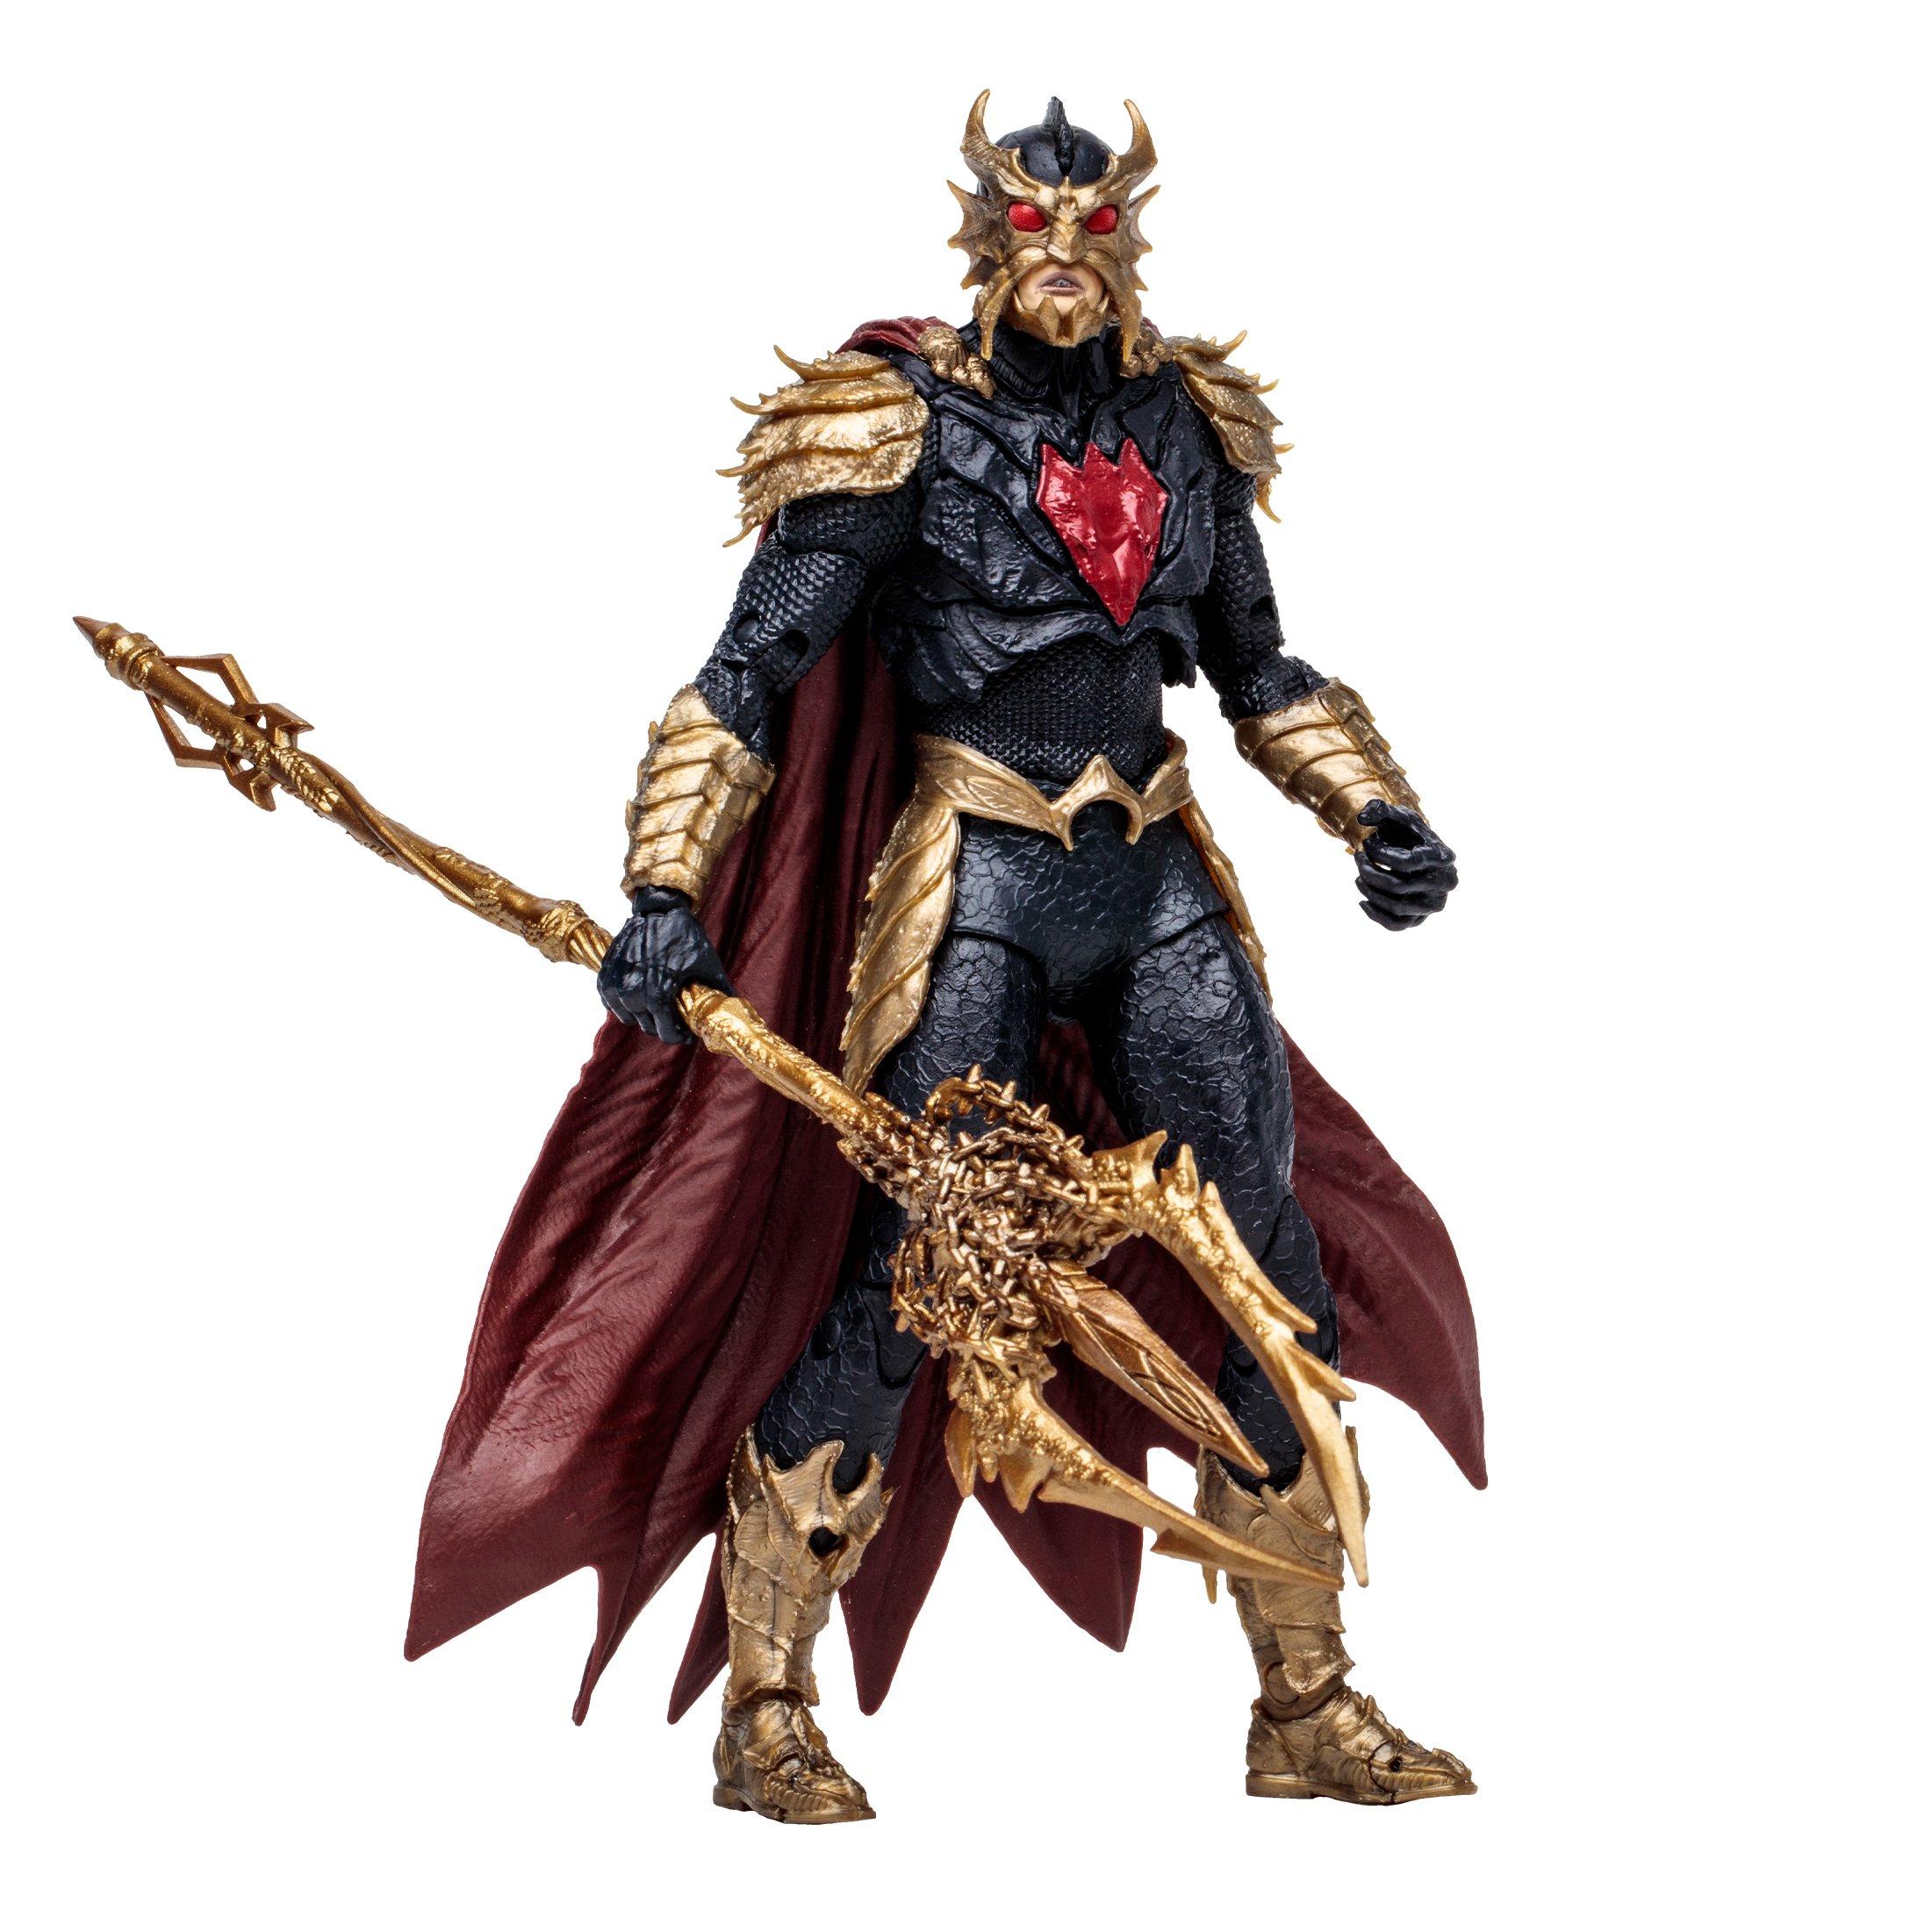 McFarlane Toys DC Direct Ocean Master (Orm) 7-in Action Figure